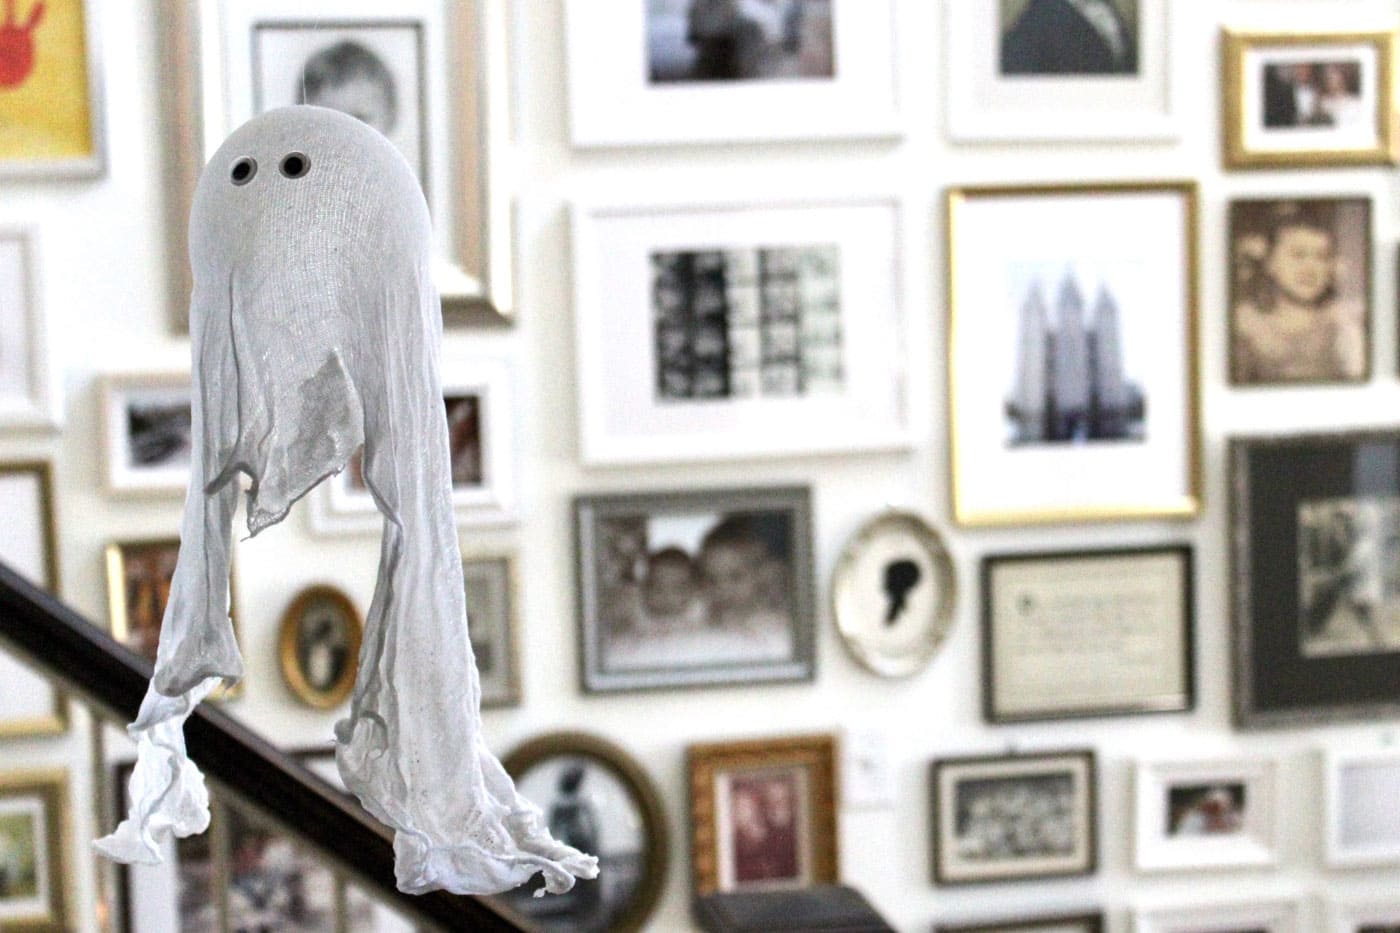 floating cheesecloth ghosts